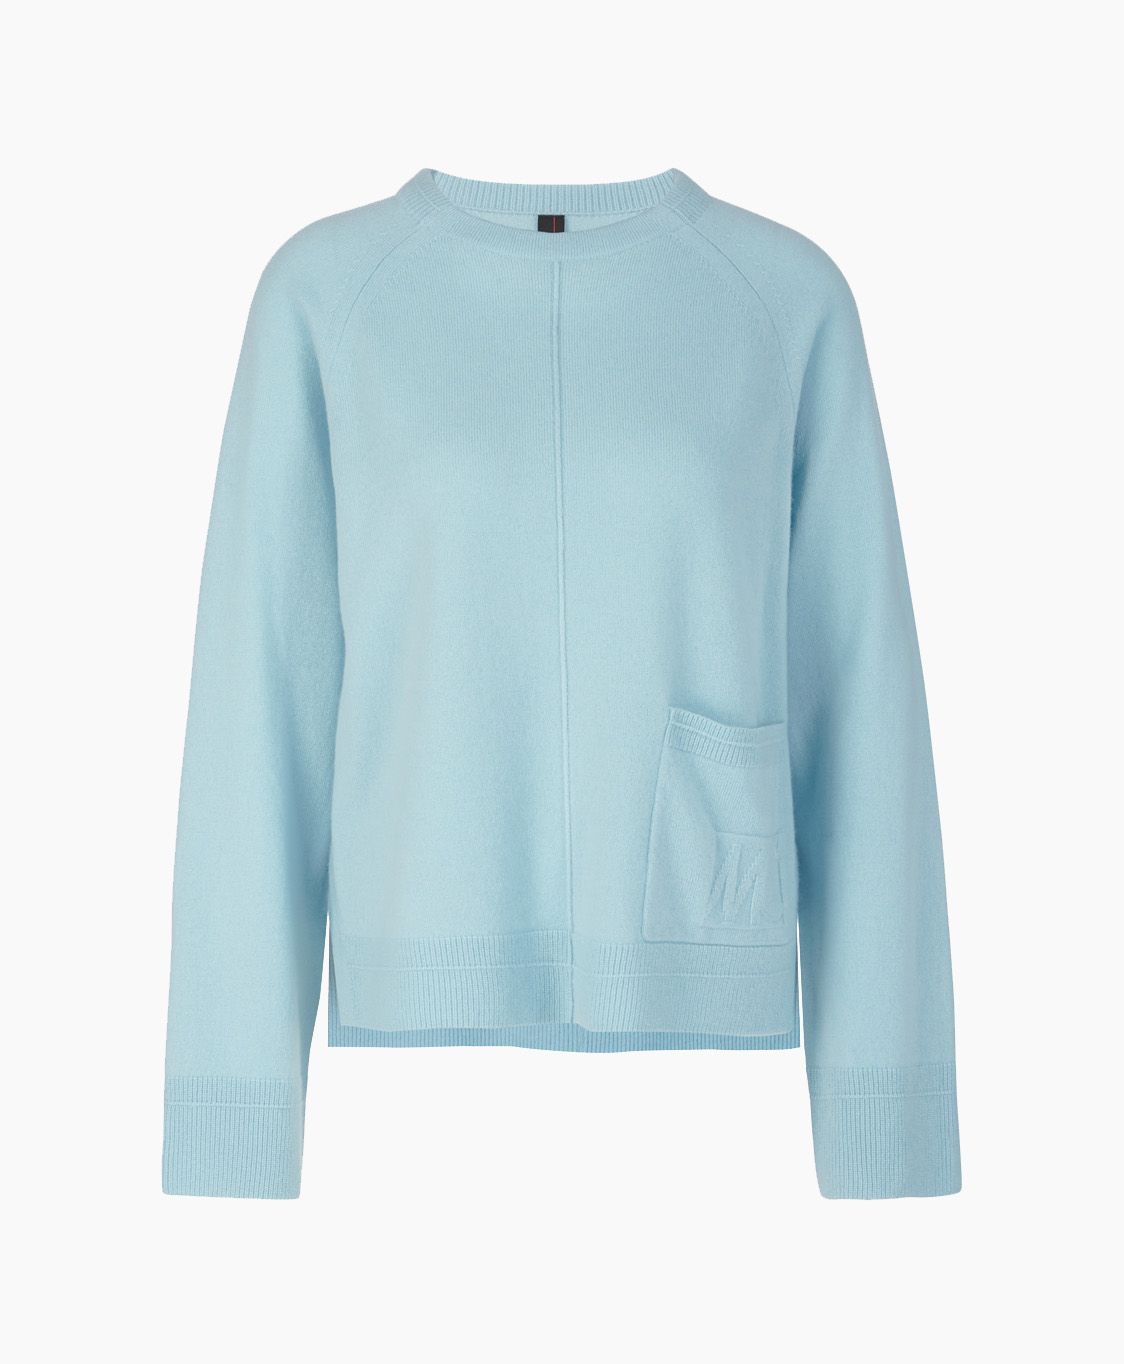 Marccain Collectie Pullover Uc 41.01 M51 Blauw